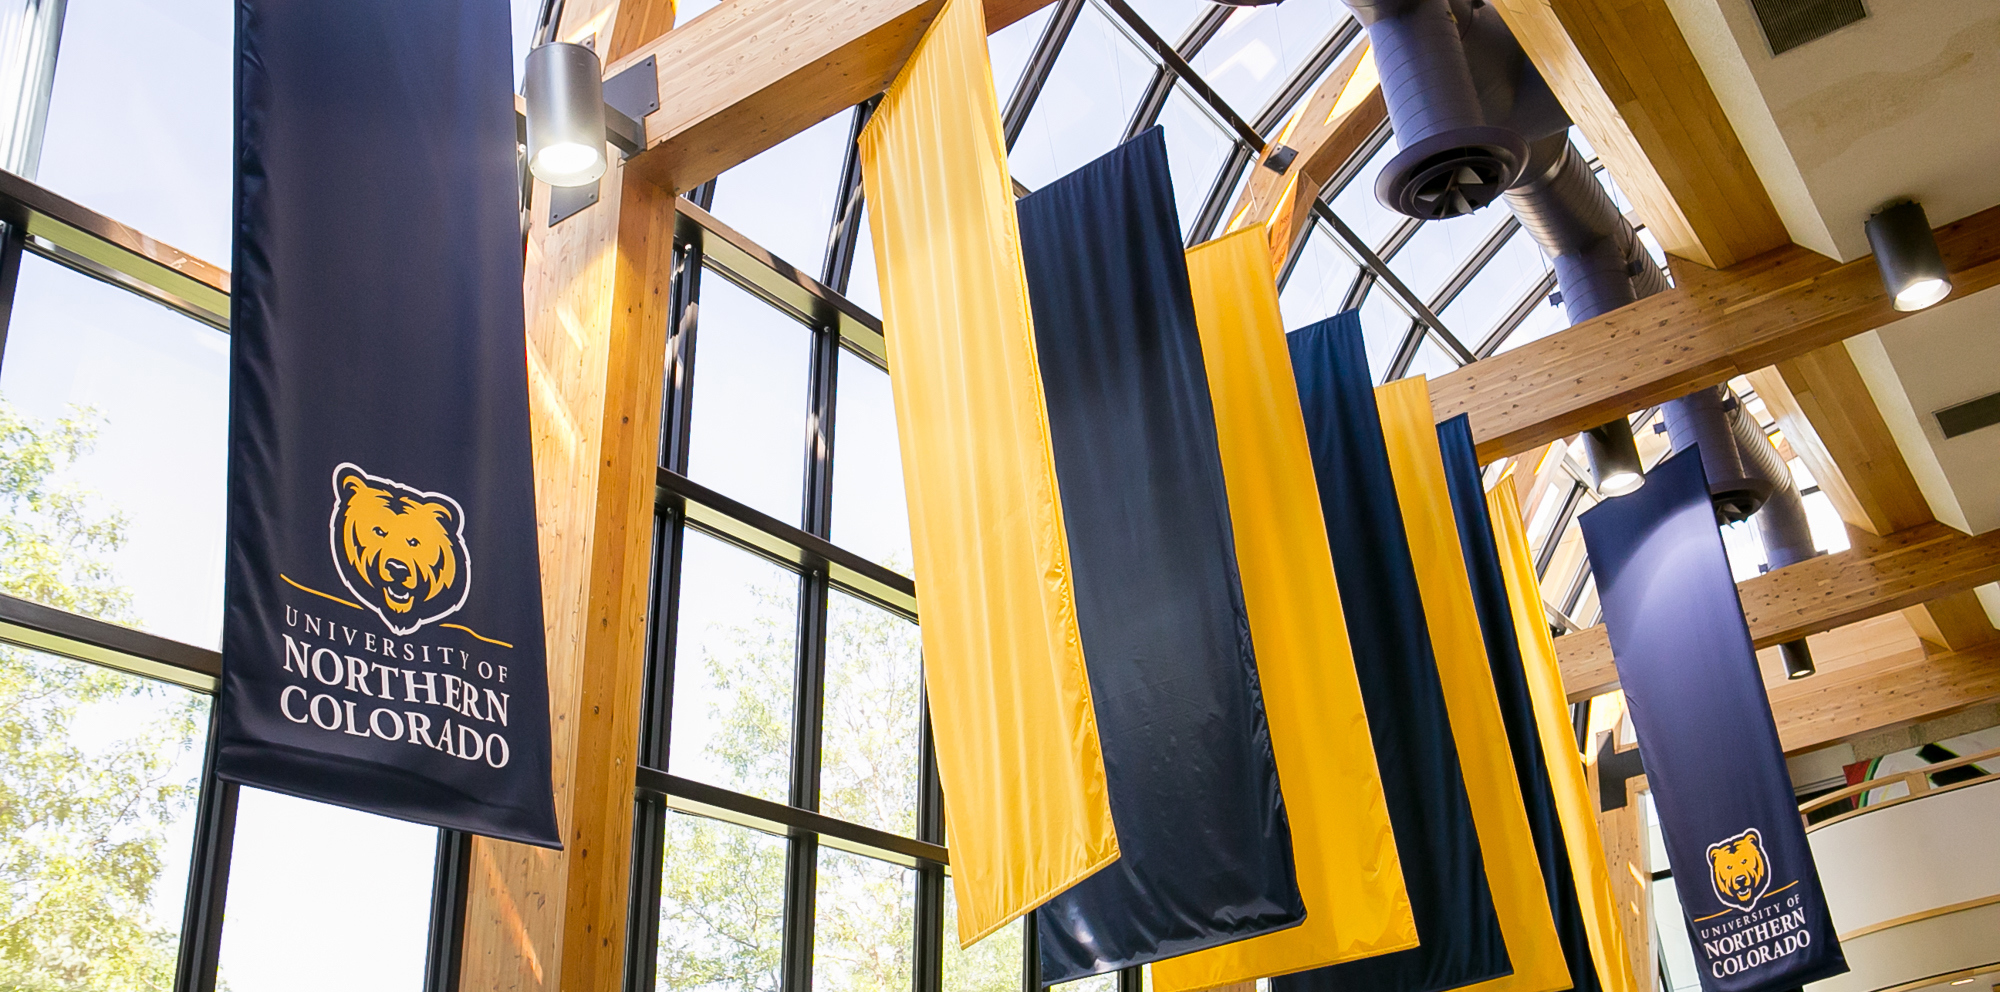 Blue and gold banners hanging from the ceiling of the university center against a backdrop of windows